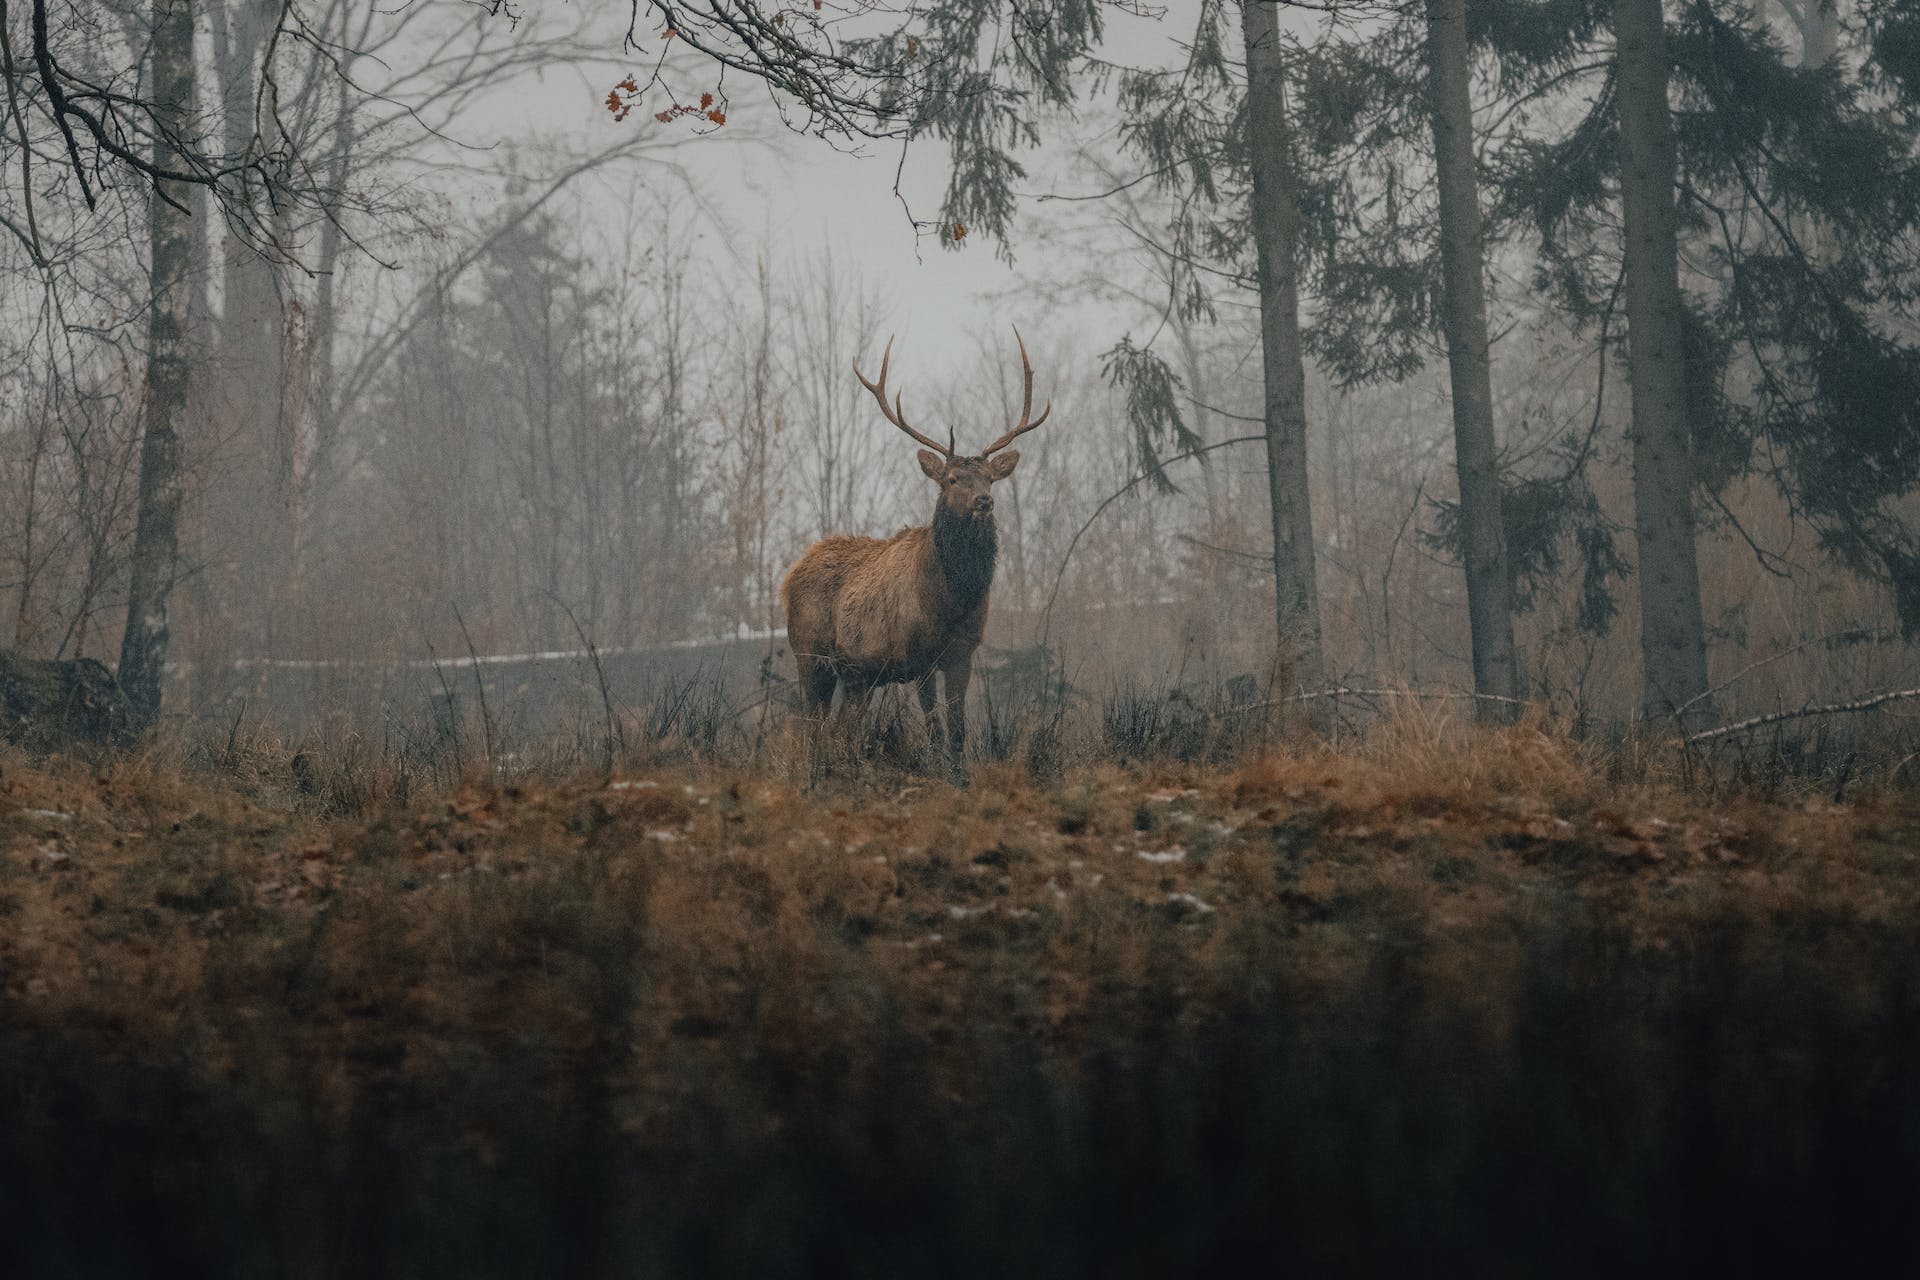 A stag standing in a winter forest